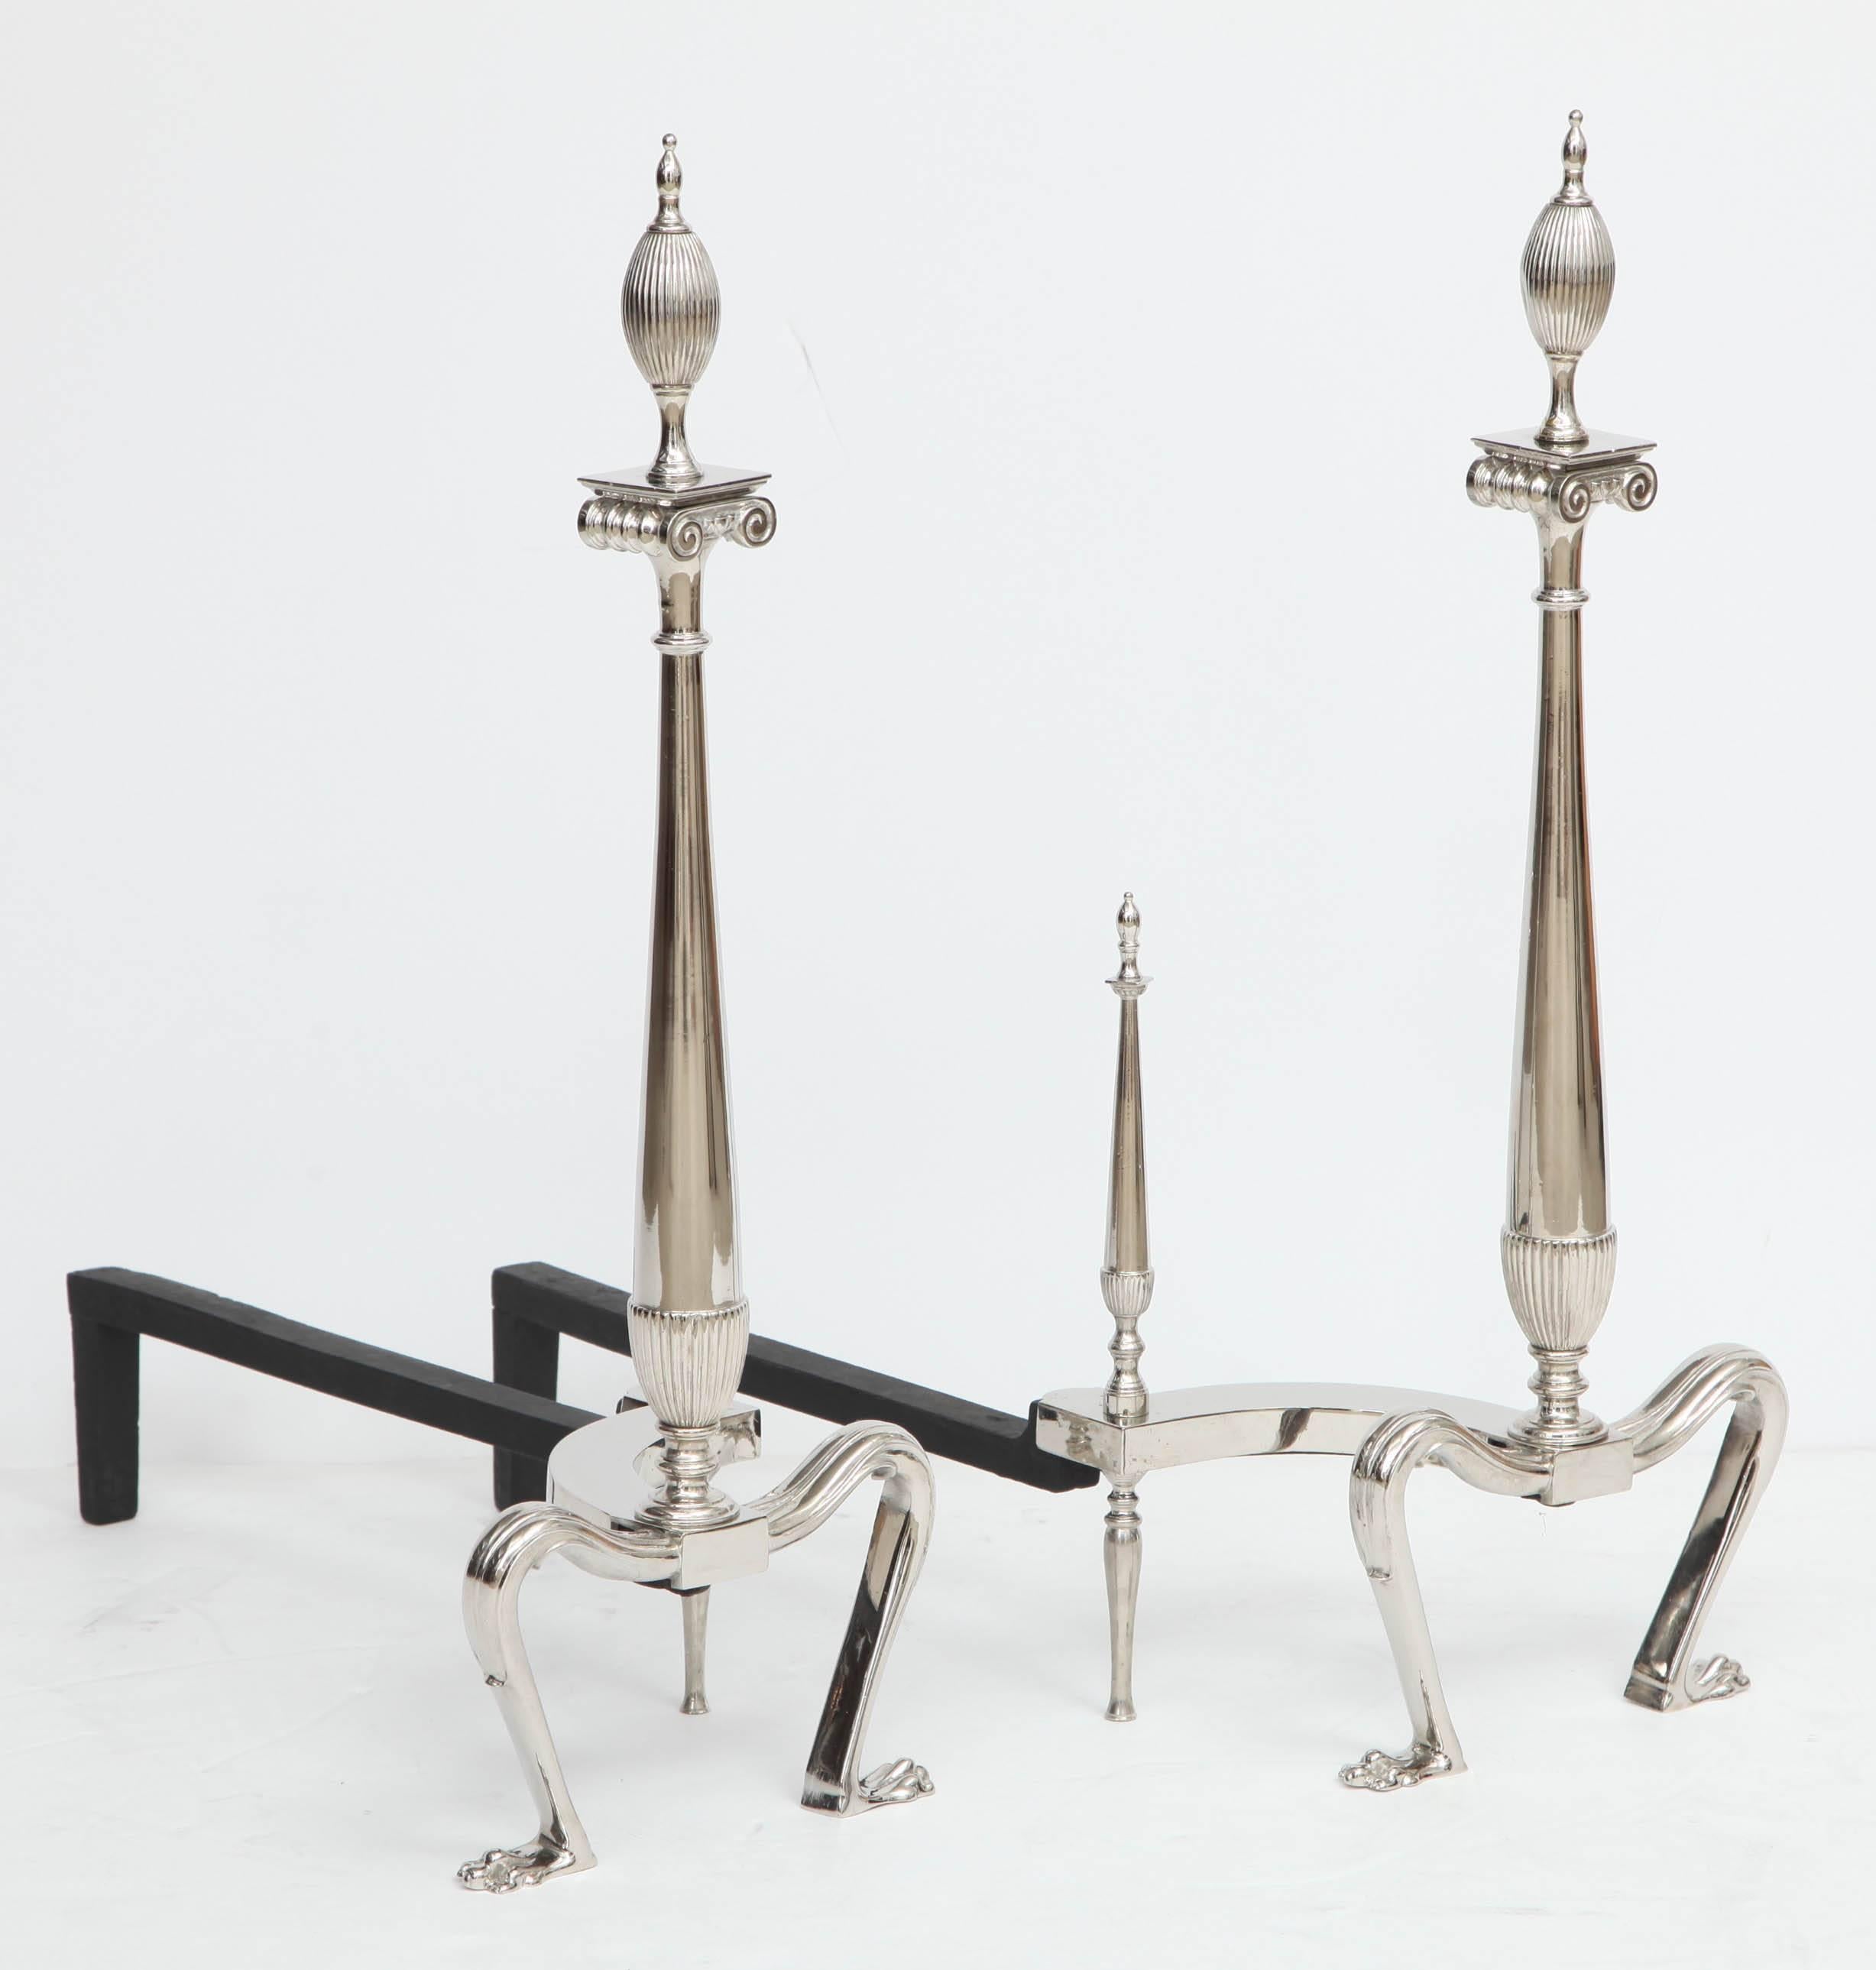 Pair of stylish Art Deco polished nickel andirons with fluted finial tops on ionic capital forms.